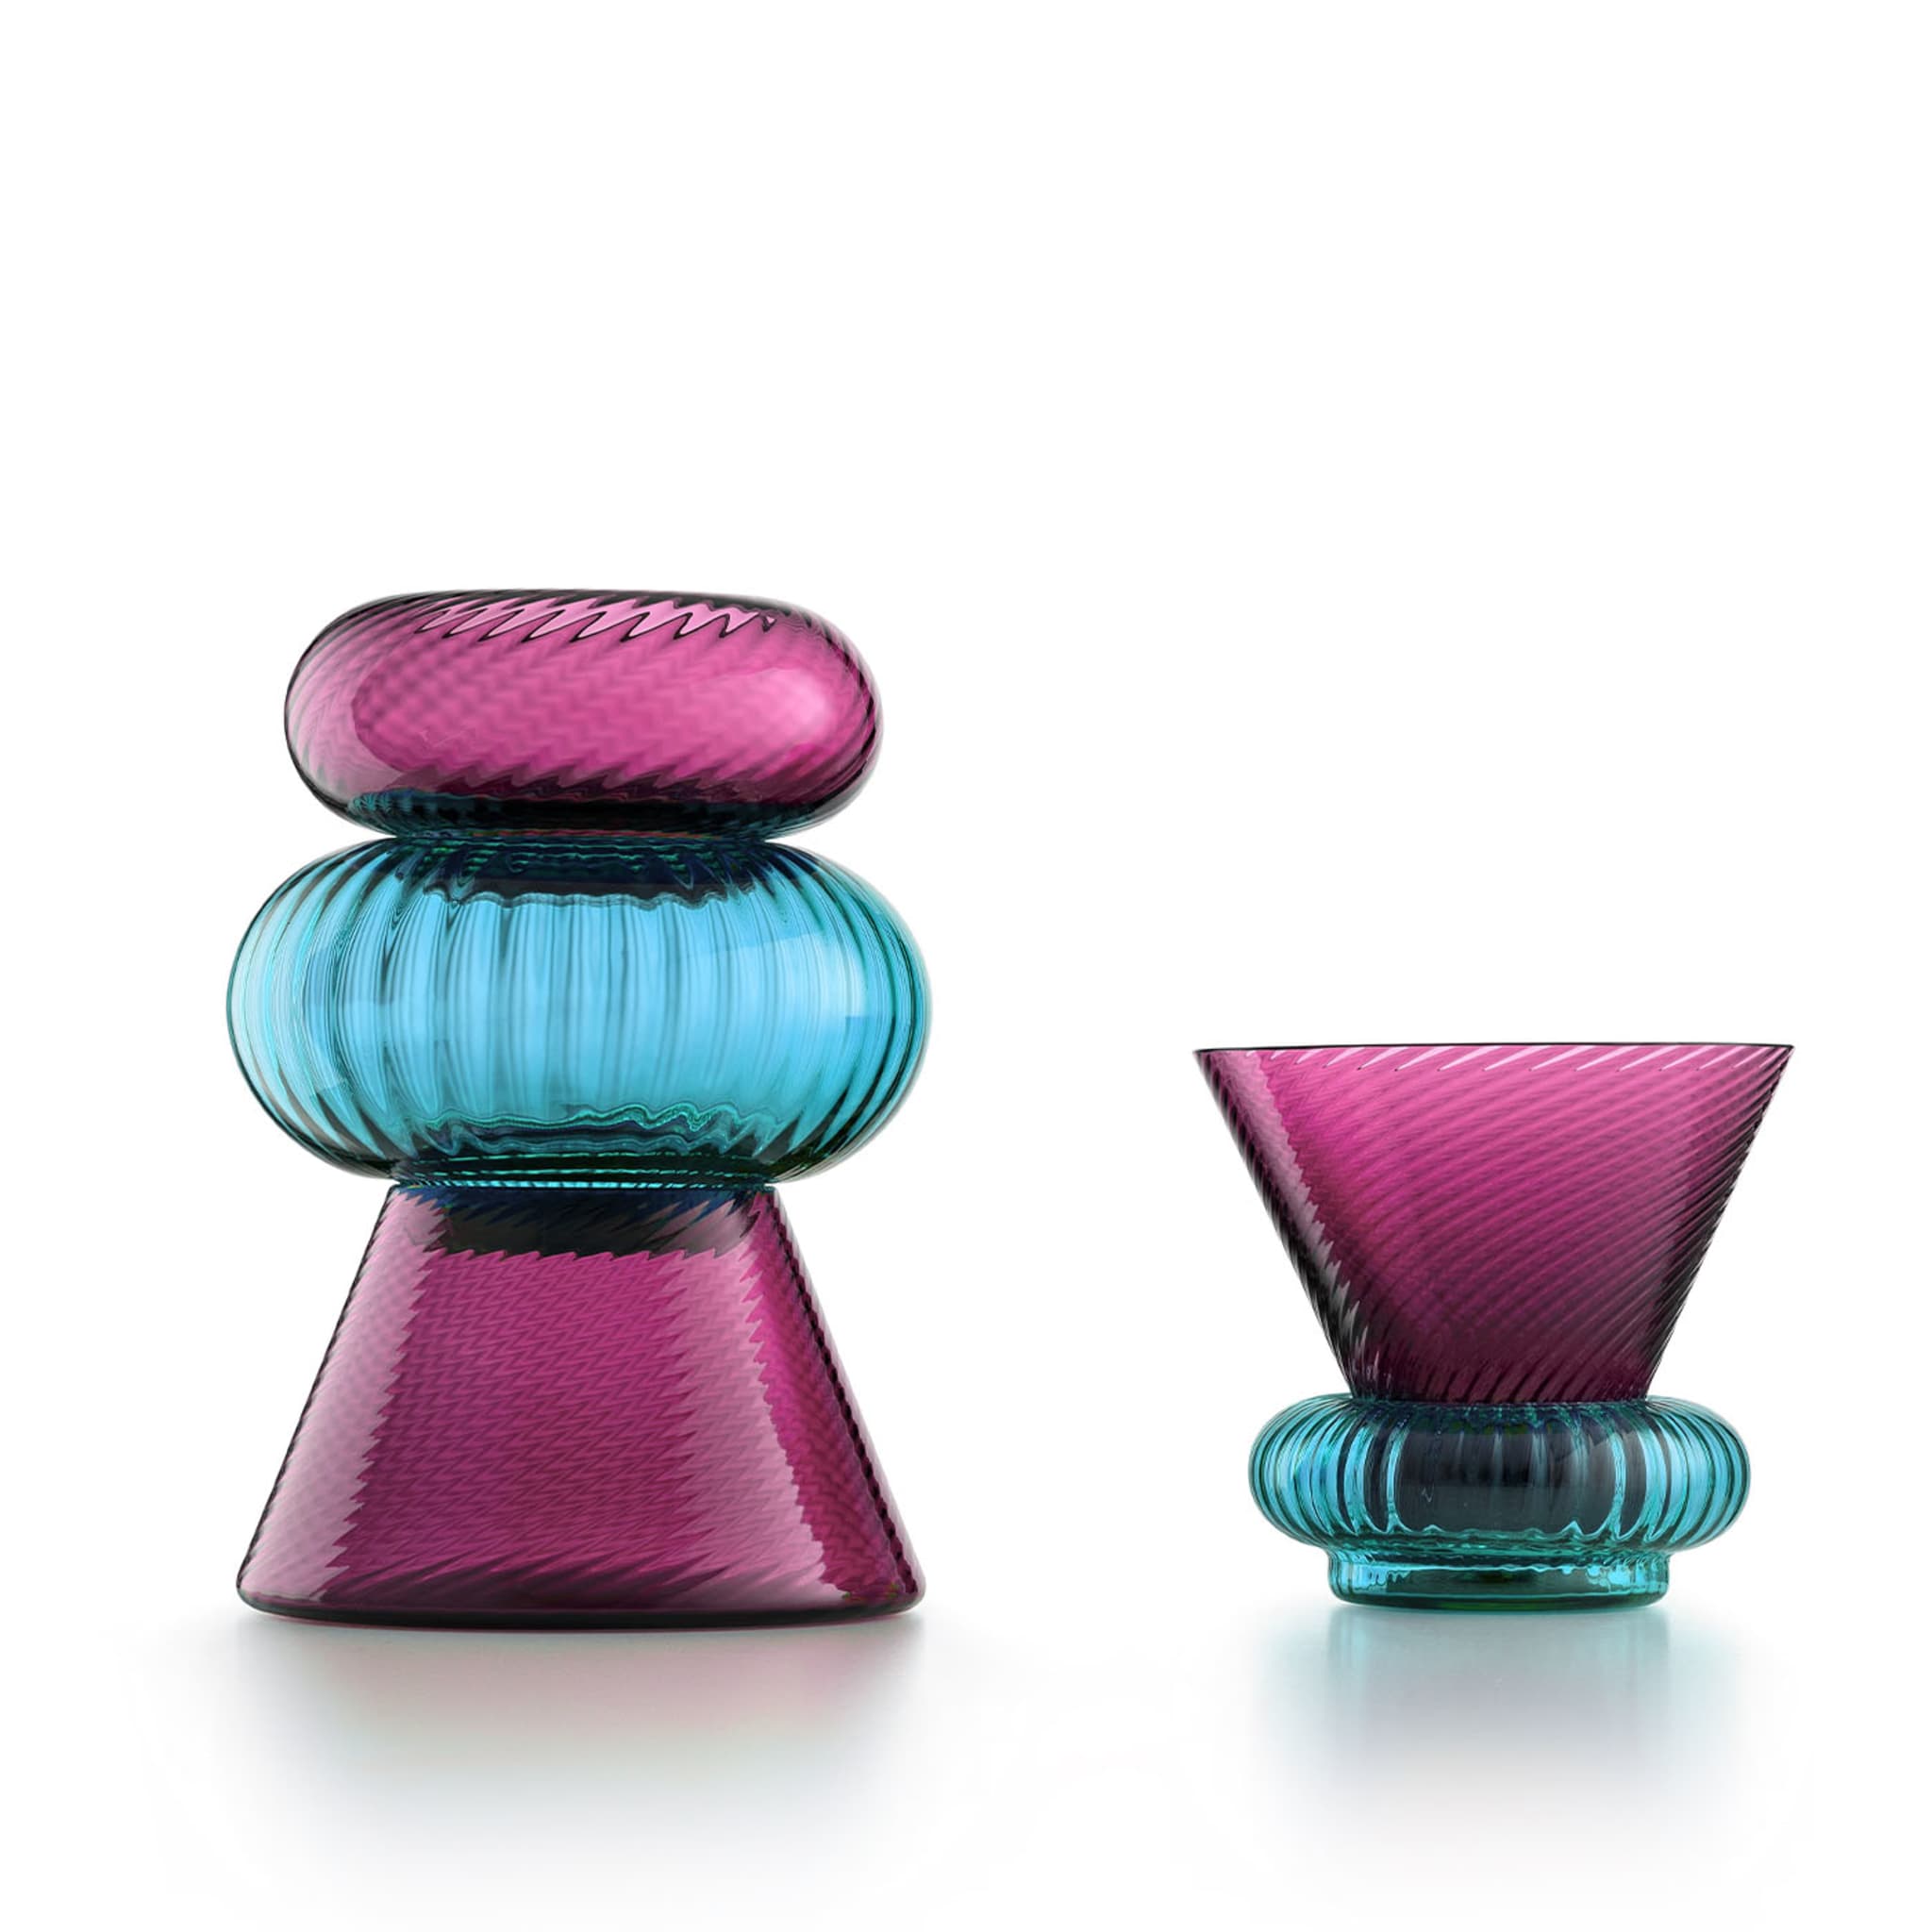 Issey Set of 5 Ruby and Turquoise Vases By Matteo Zorzenoni - Alternative view 1